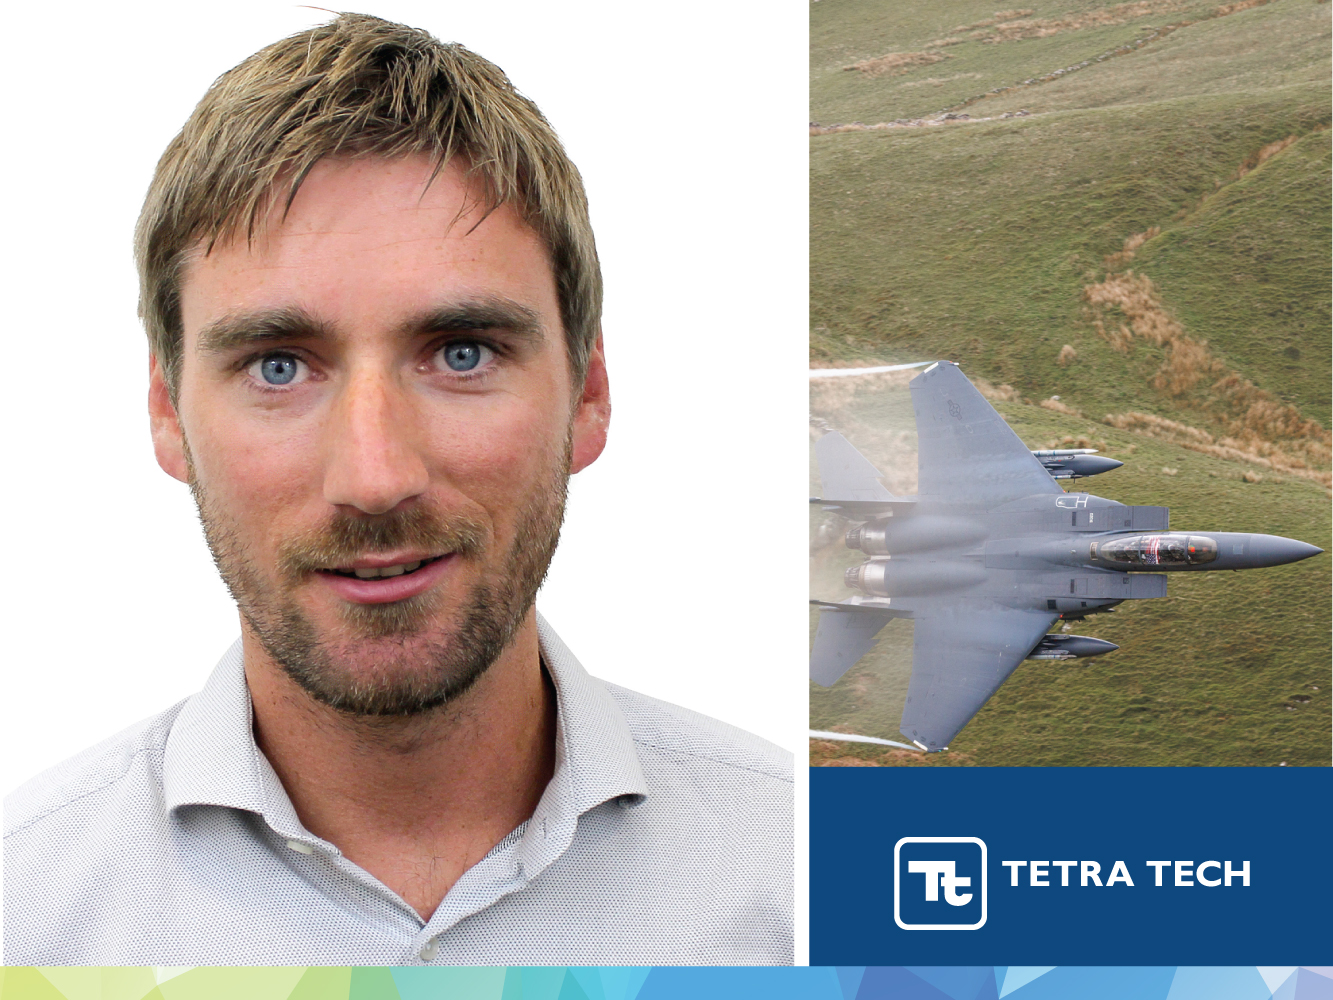 Graduate of the Year 2010, Glyn Utting began with us as a graduate and went on to project lead various defence projects globally in locations such as Nepal, Afghanistan and Libya.